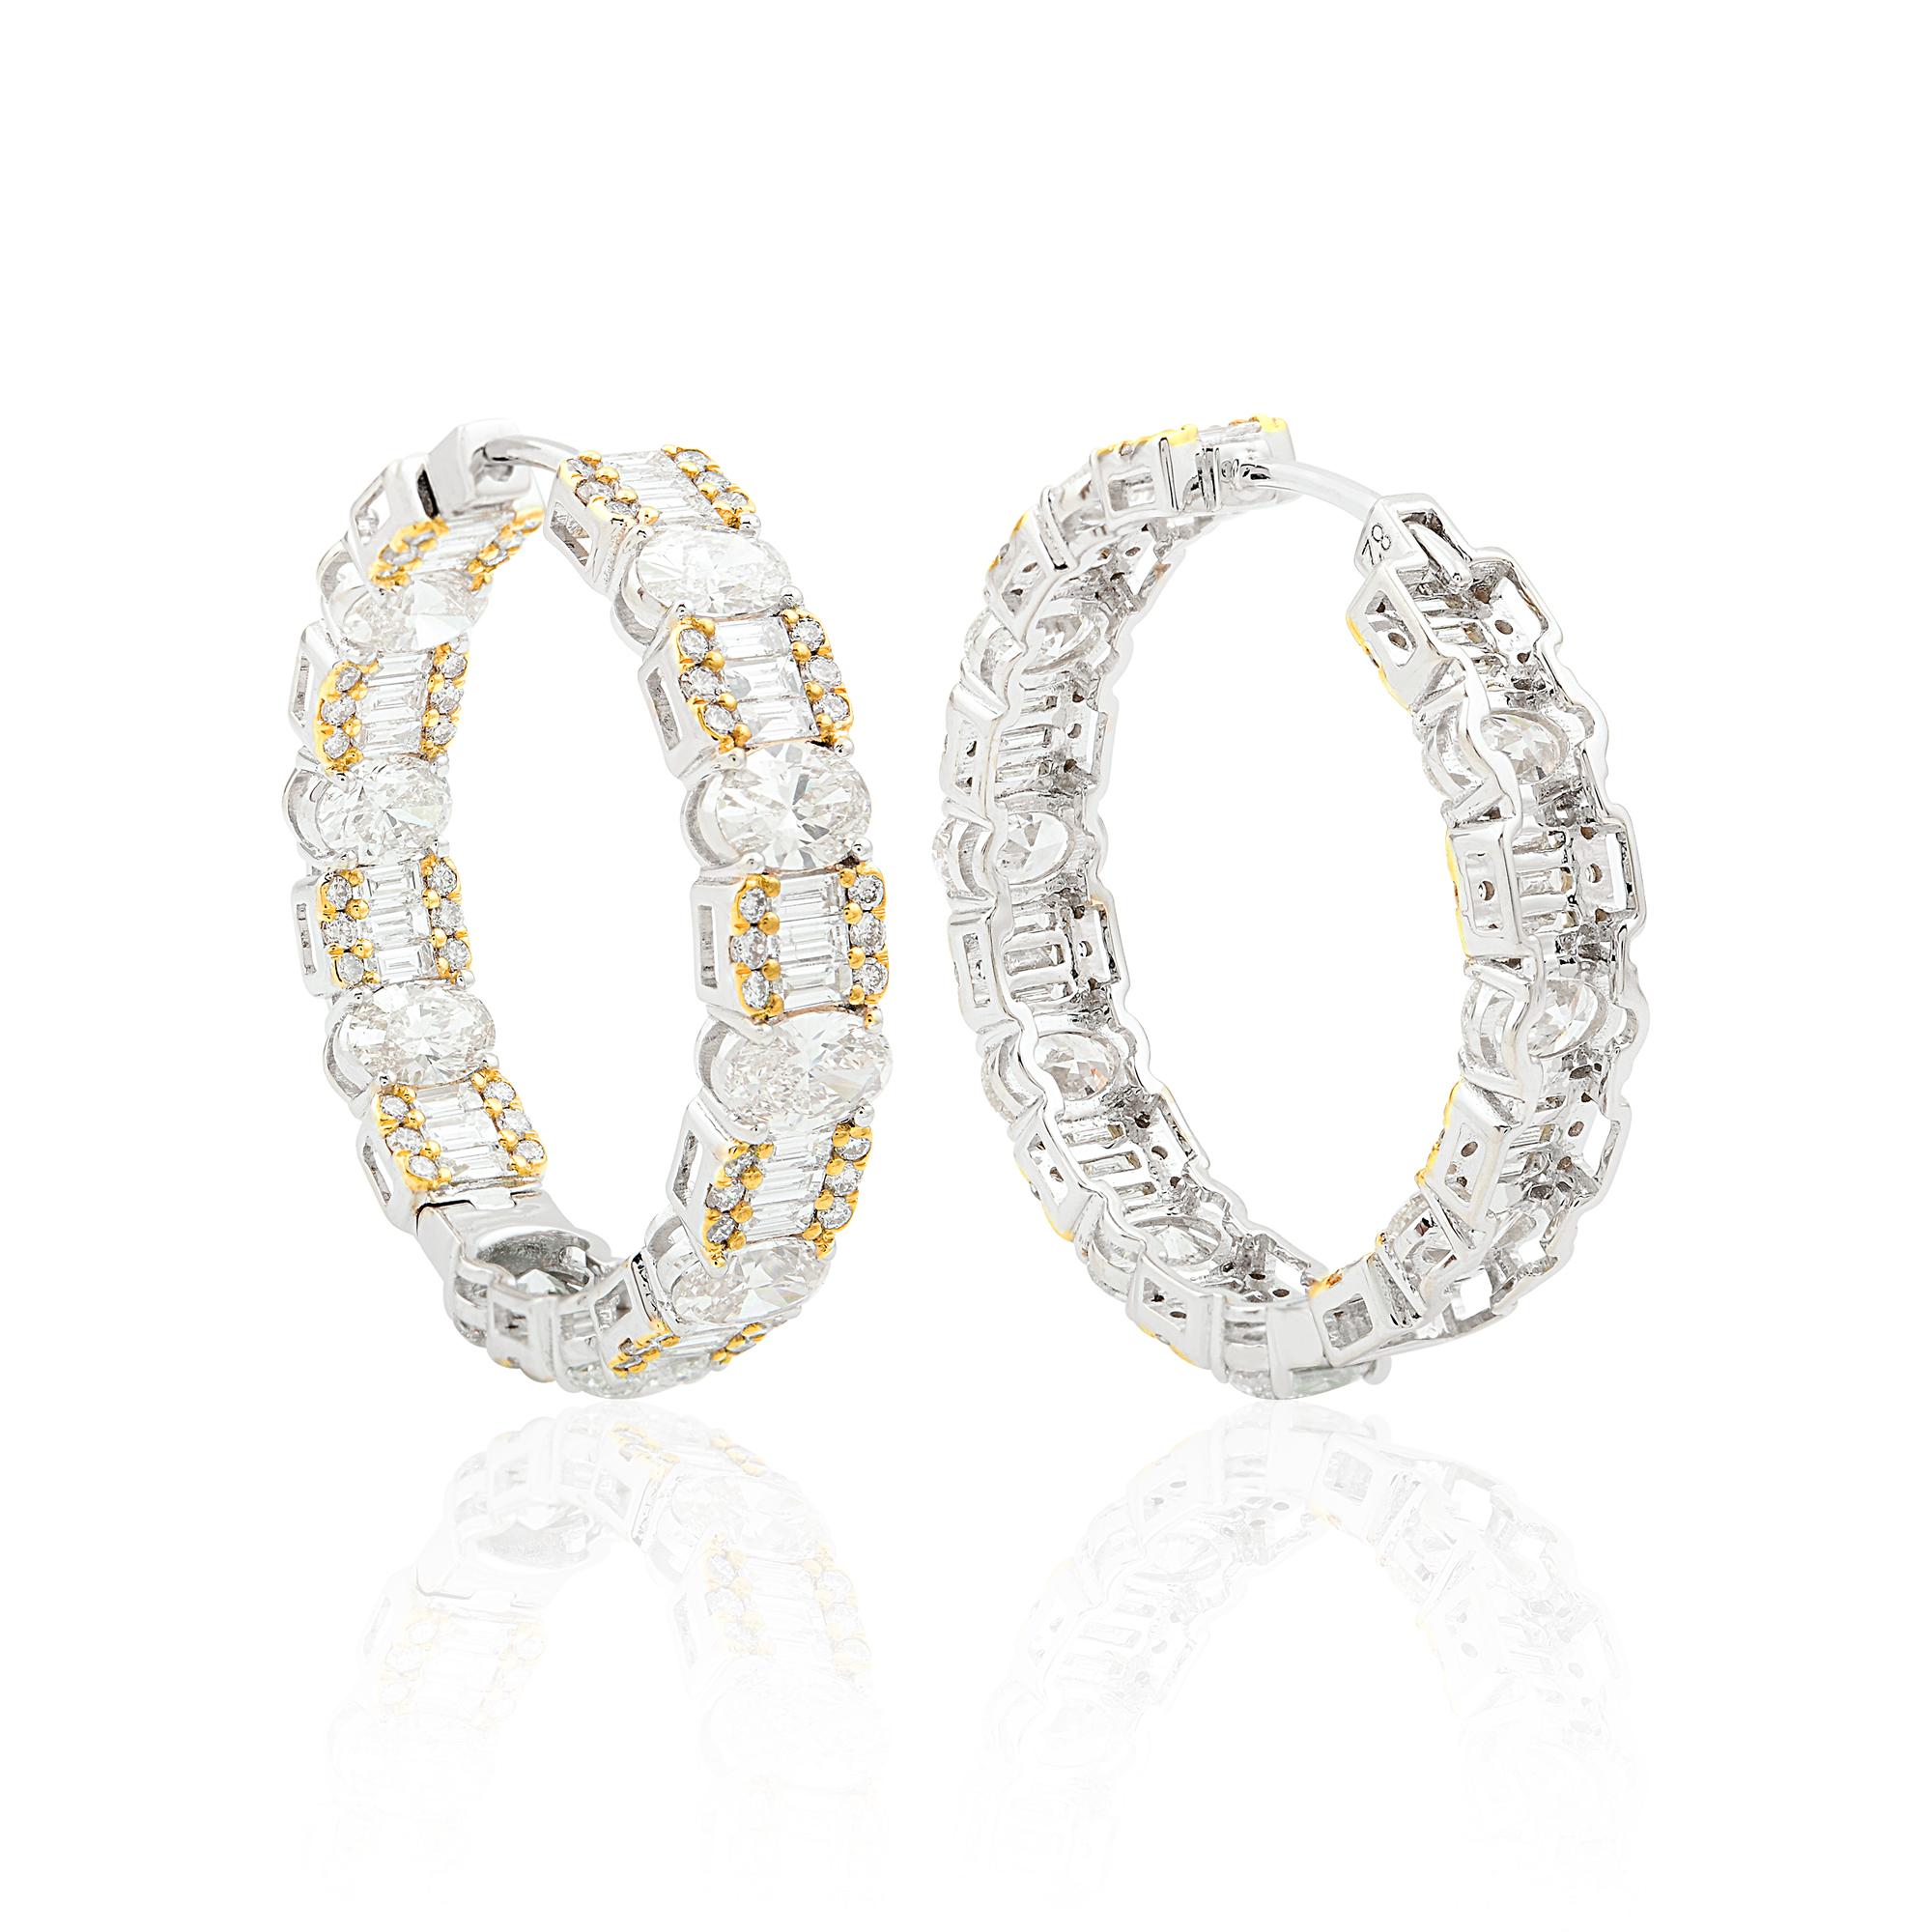 Elevate your style with these exquisite Oval Baguette Diamond Hoop Earrings, a stunning blend of elegance and sophistication. Crafted from the finest 18 karat white and yellow gold, these earrings are a true testament to luxury craftsmanship.

Item